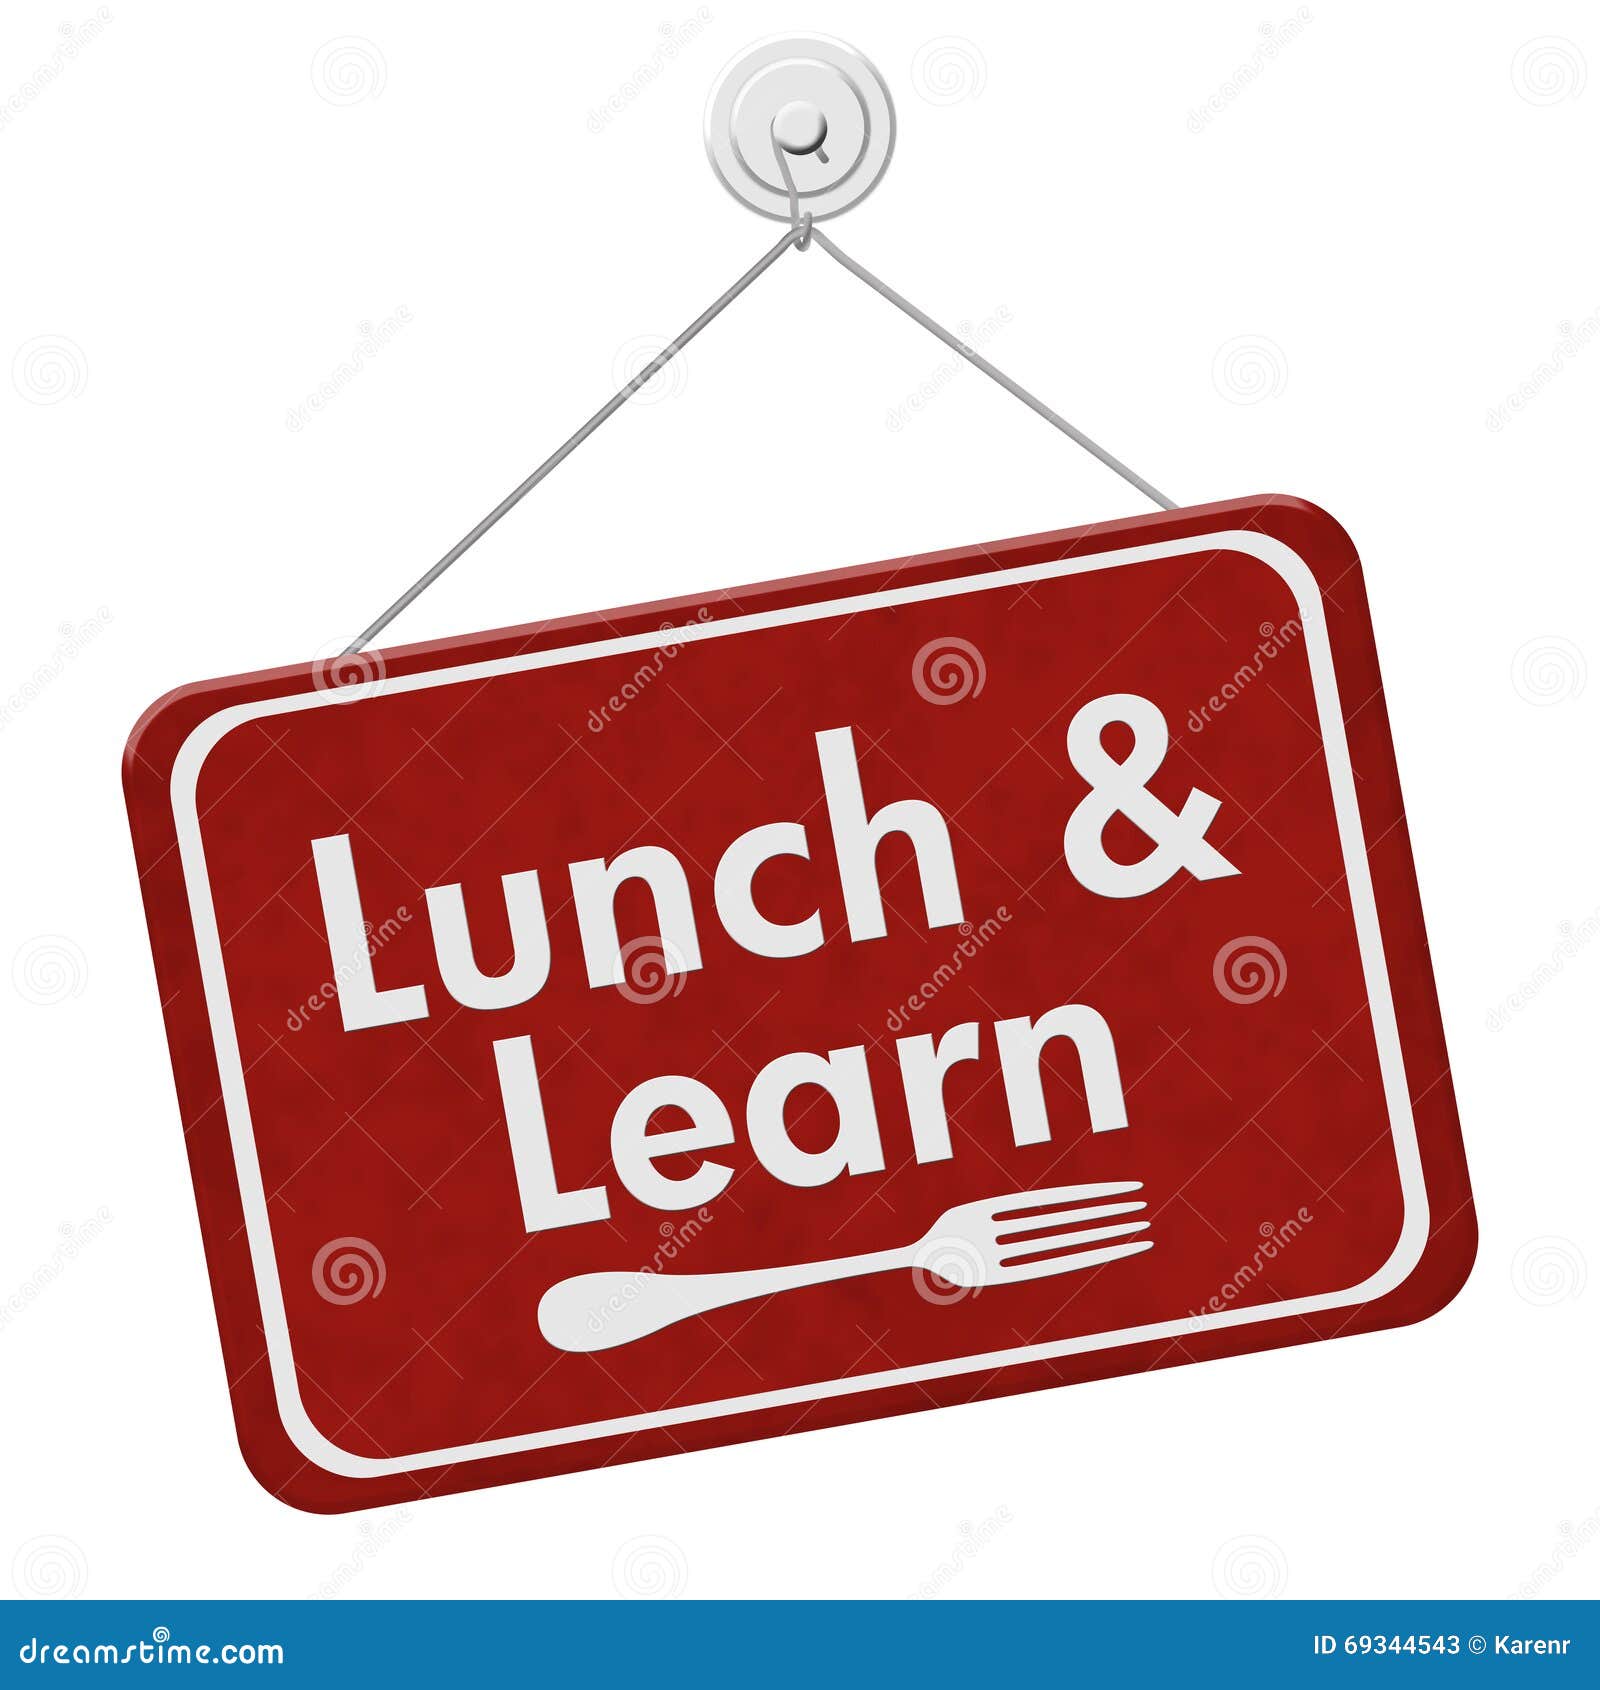 lunch and learn sign